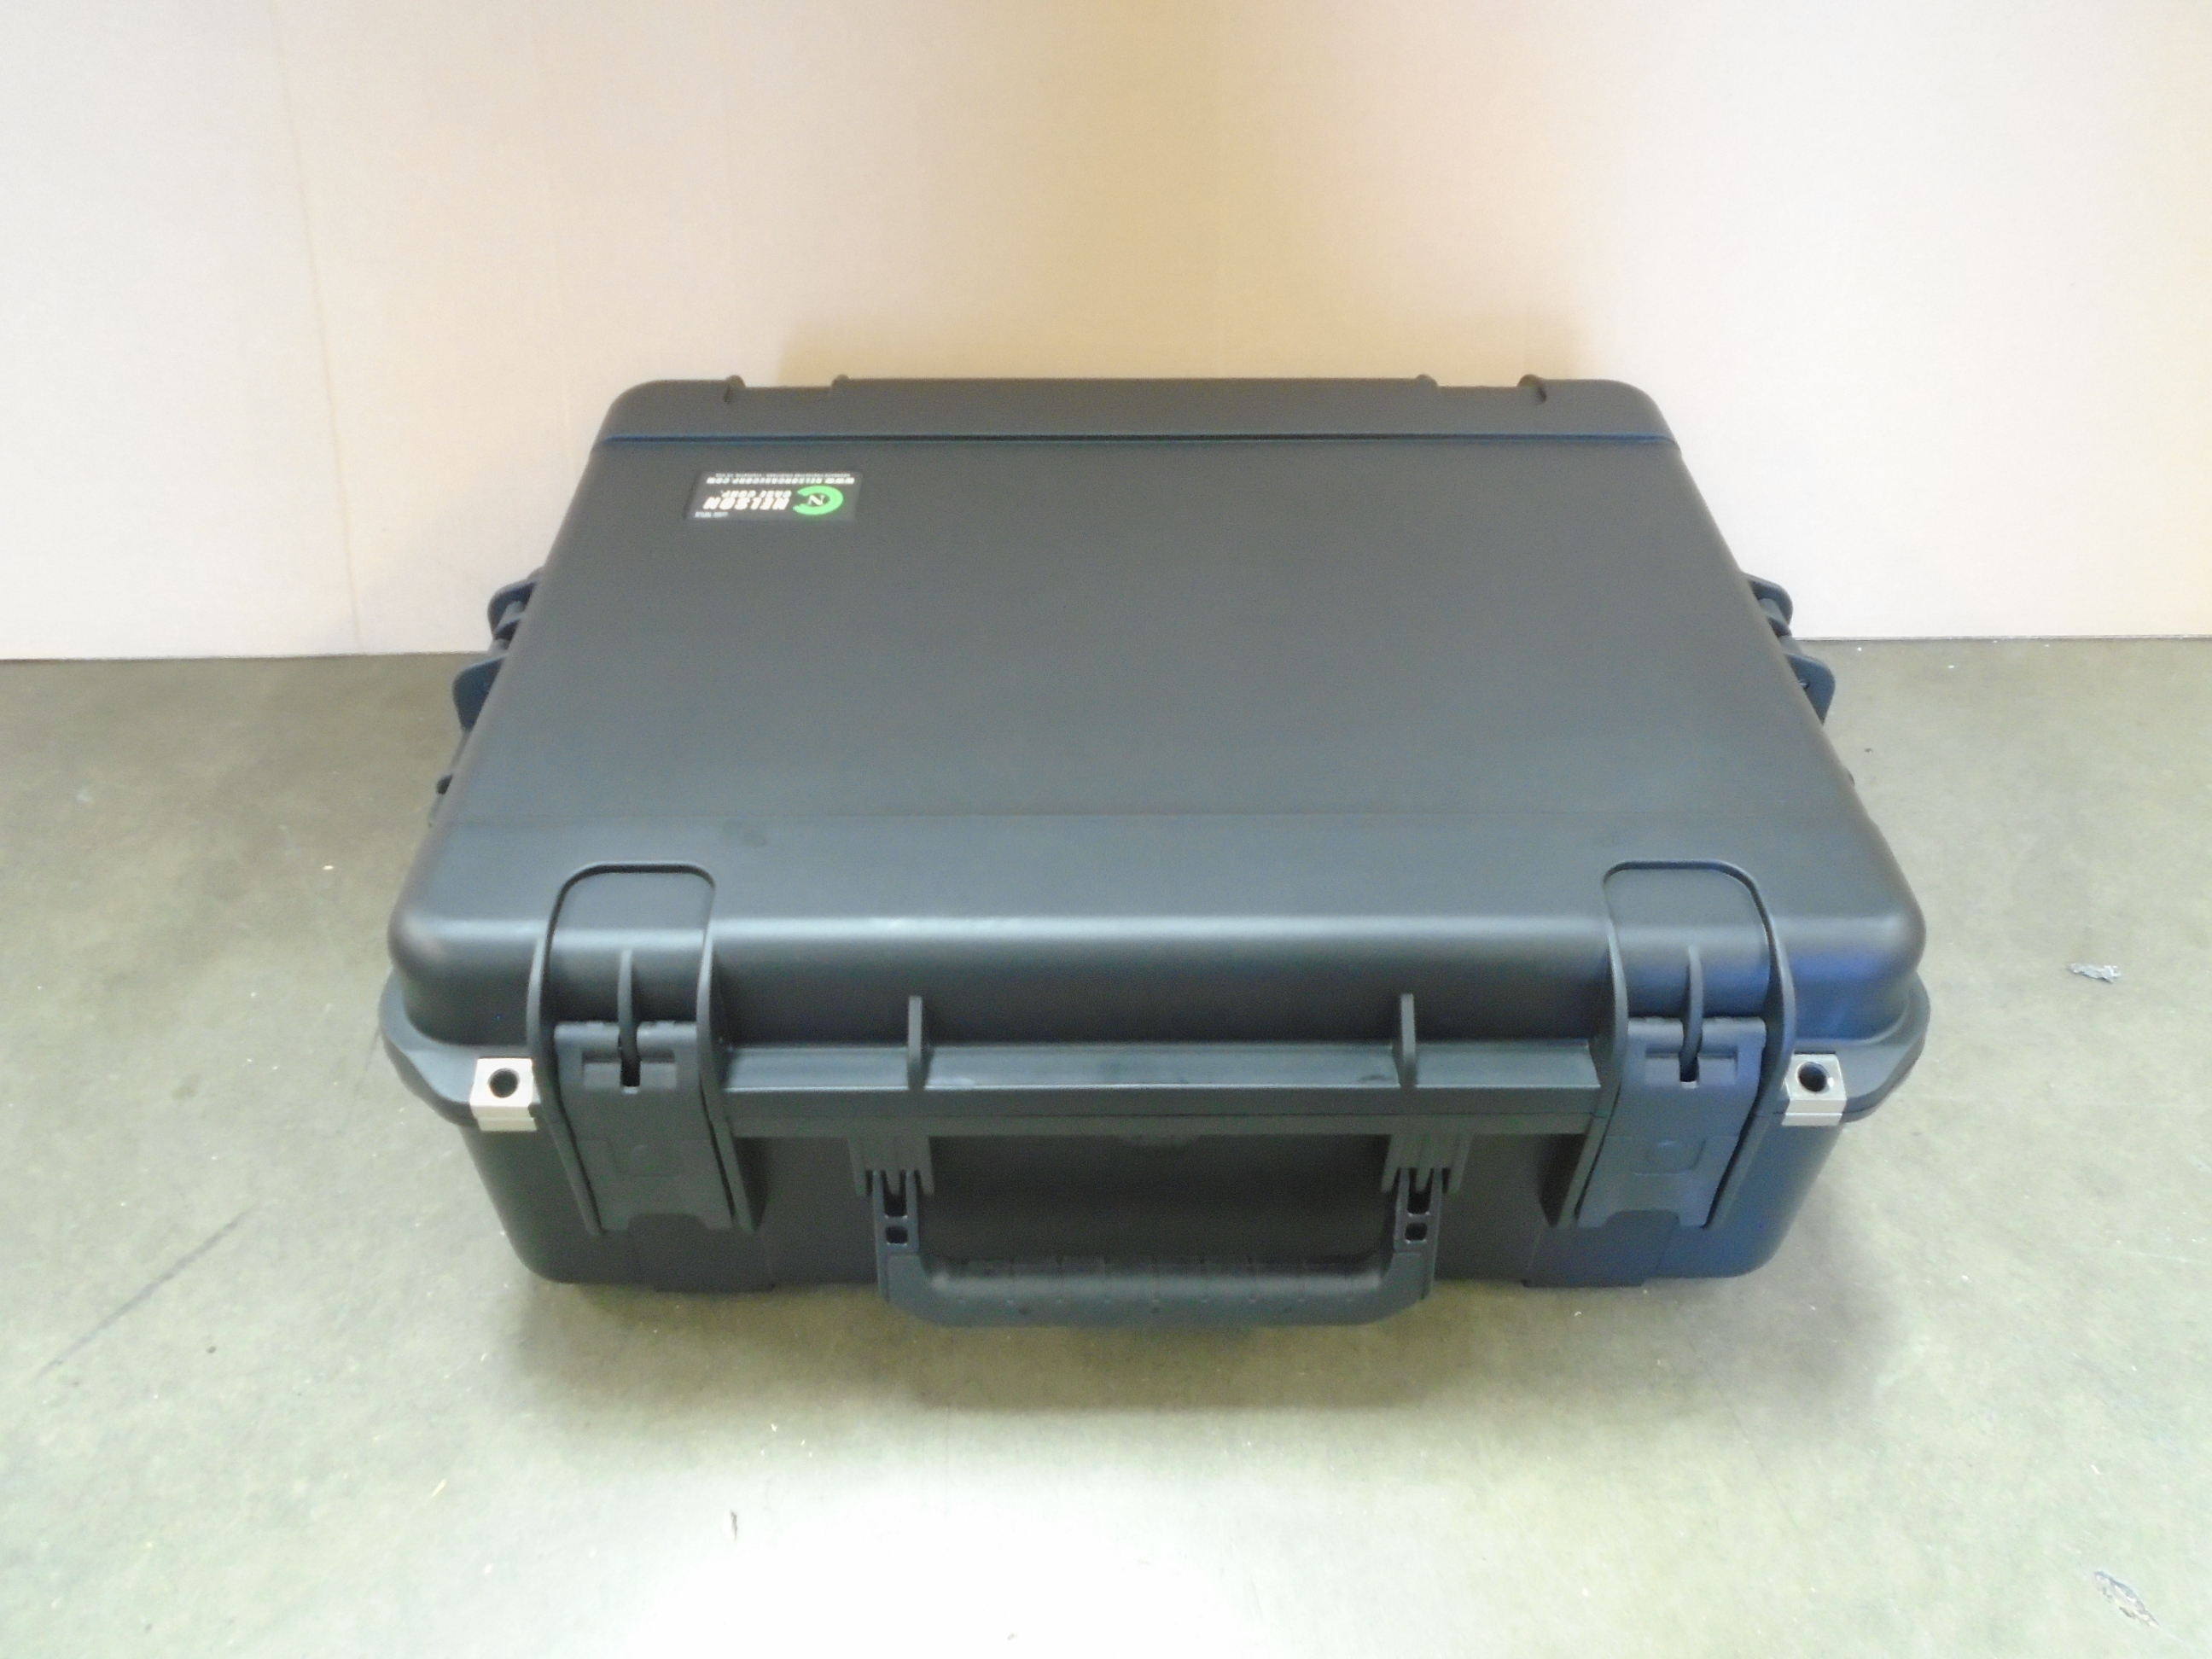 Print # 9031 - SKB 3i-2217-8 Retrofitted for Lightware MX2 8X8 HDMI20-L Switcher with 1-RU Rack Shell By Nelson Case Corp